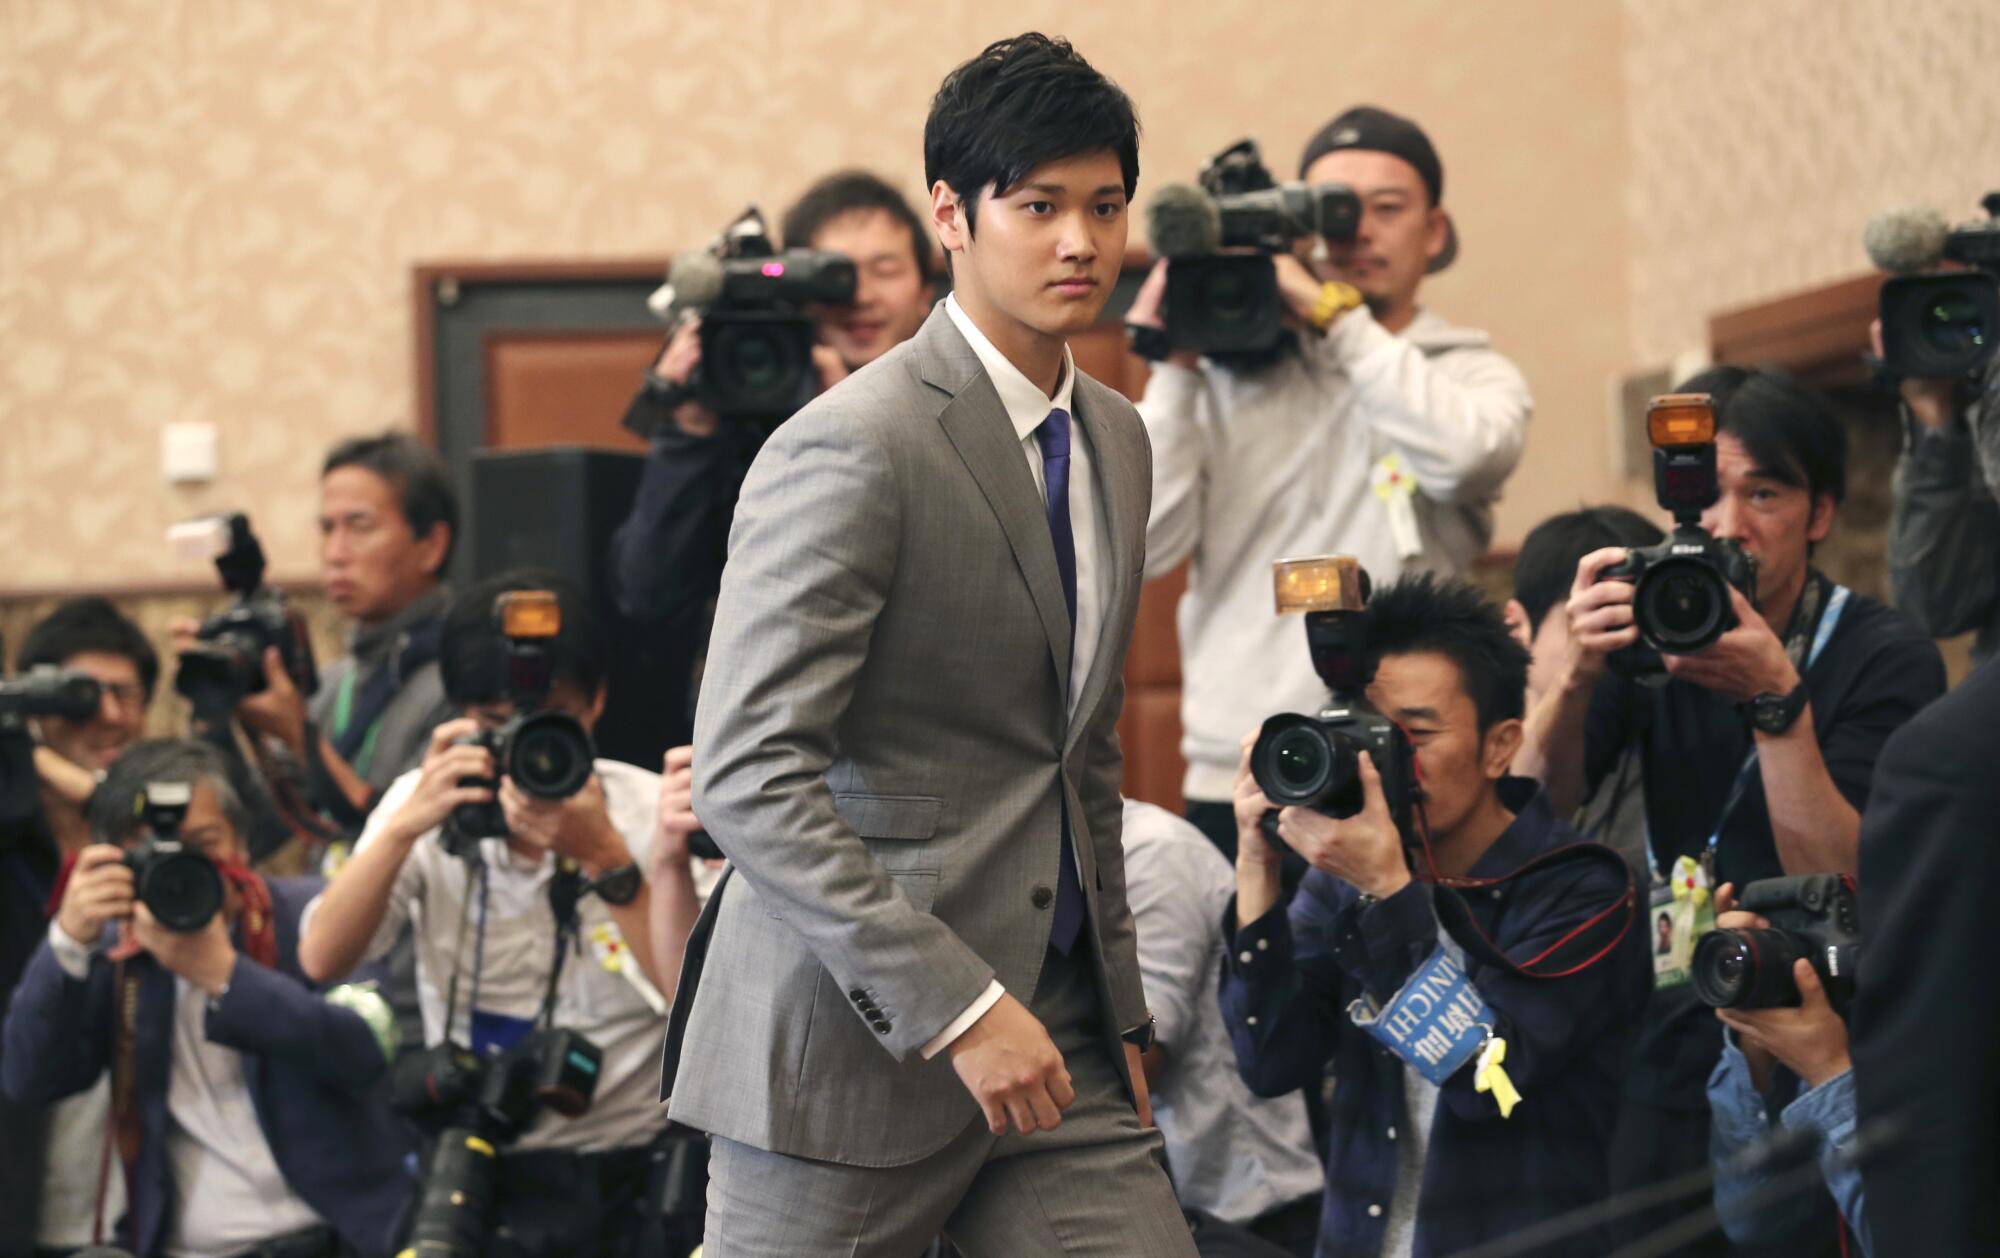 Pitcher-outfielder Shohei Ohtani arrives for a news conference at the Japanese National Press Center on Nov. 11, 2017.